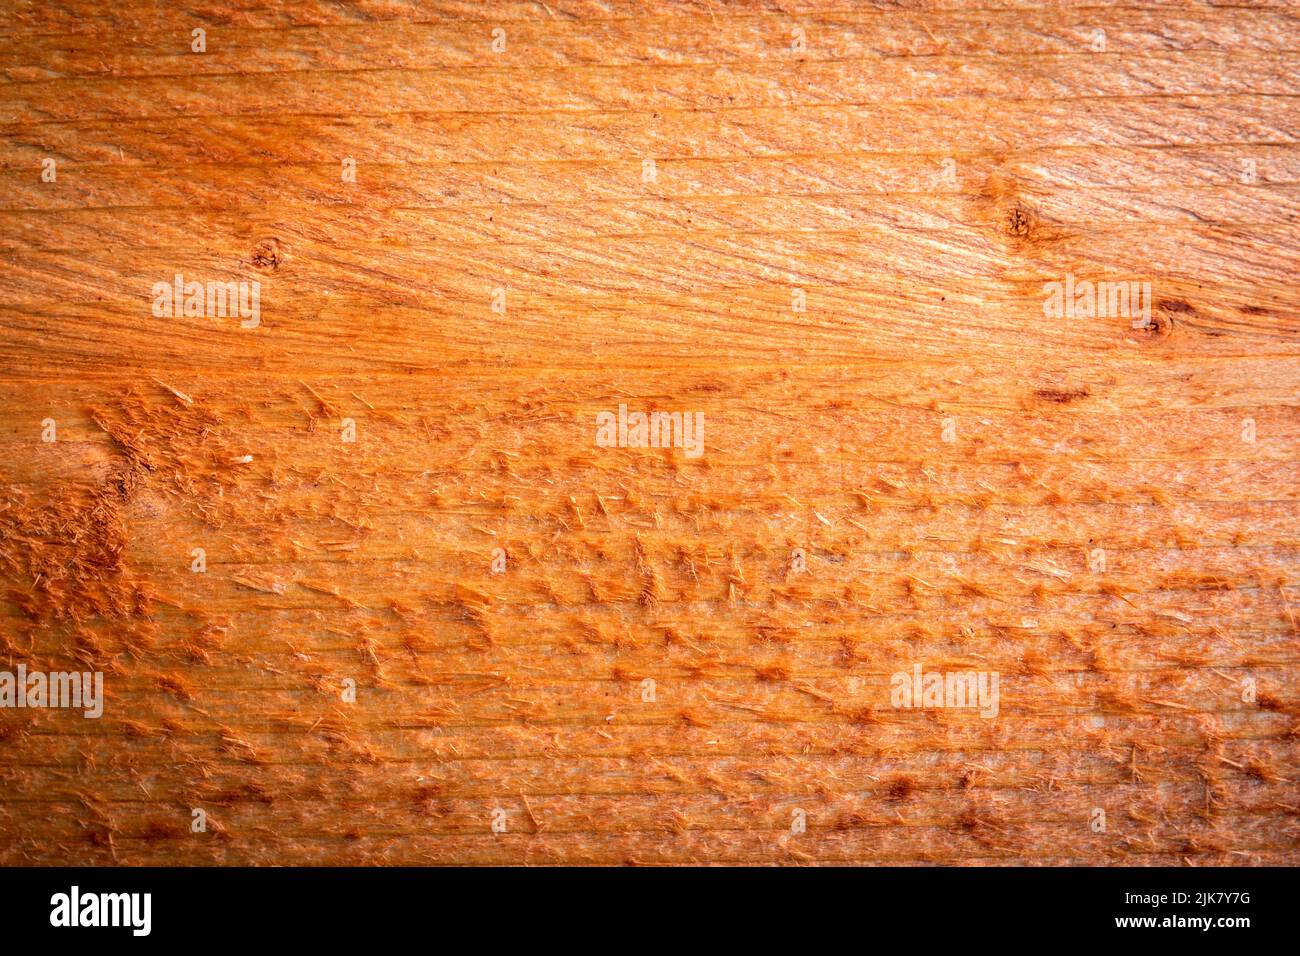 Orange painted wooden board with texture. Scabs and branches. Stock Photo